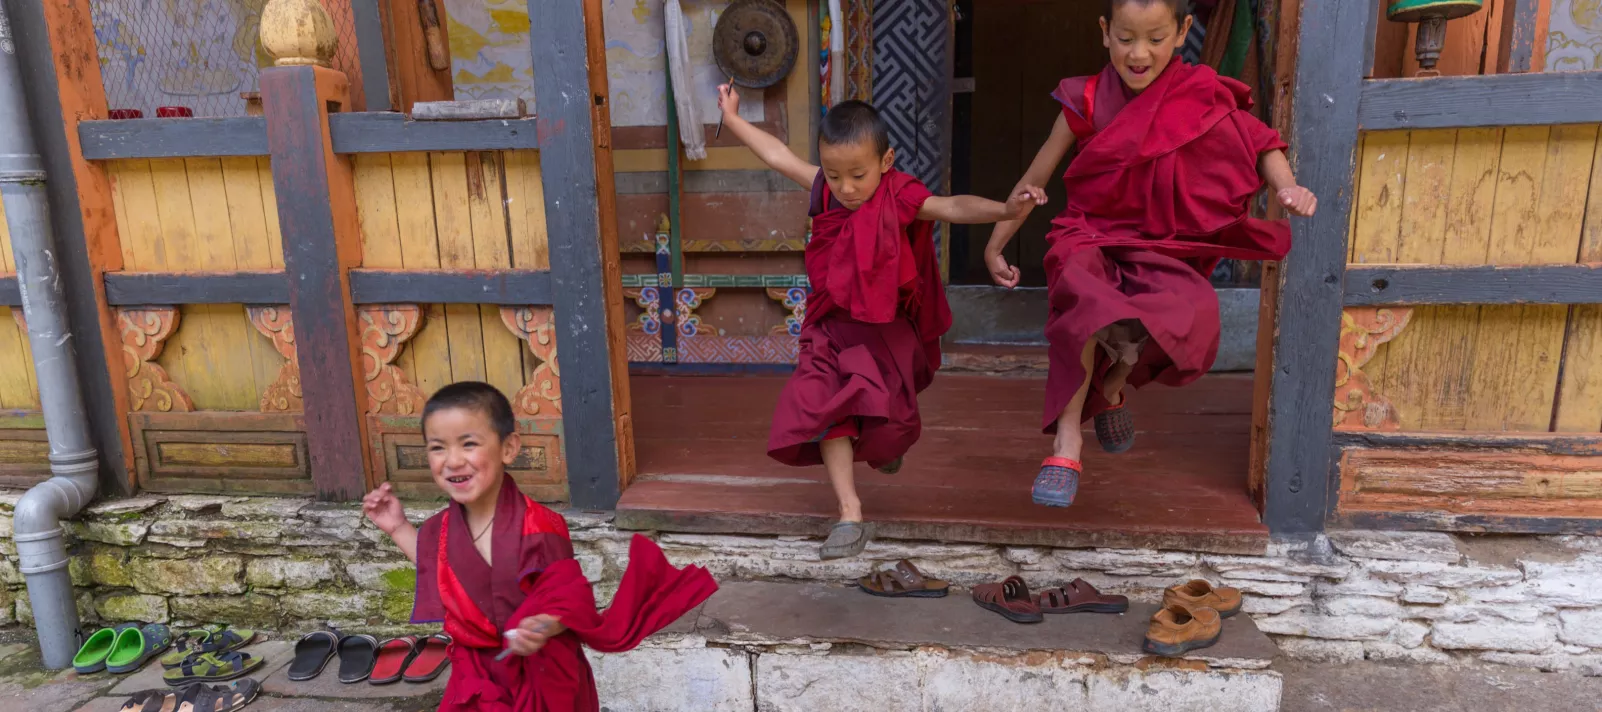 Monks in Bumthang